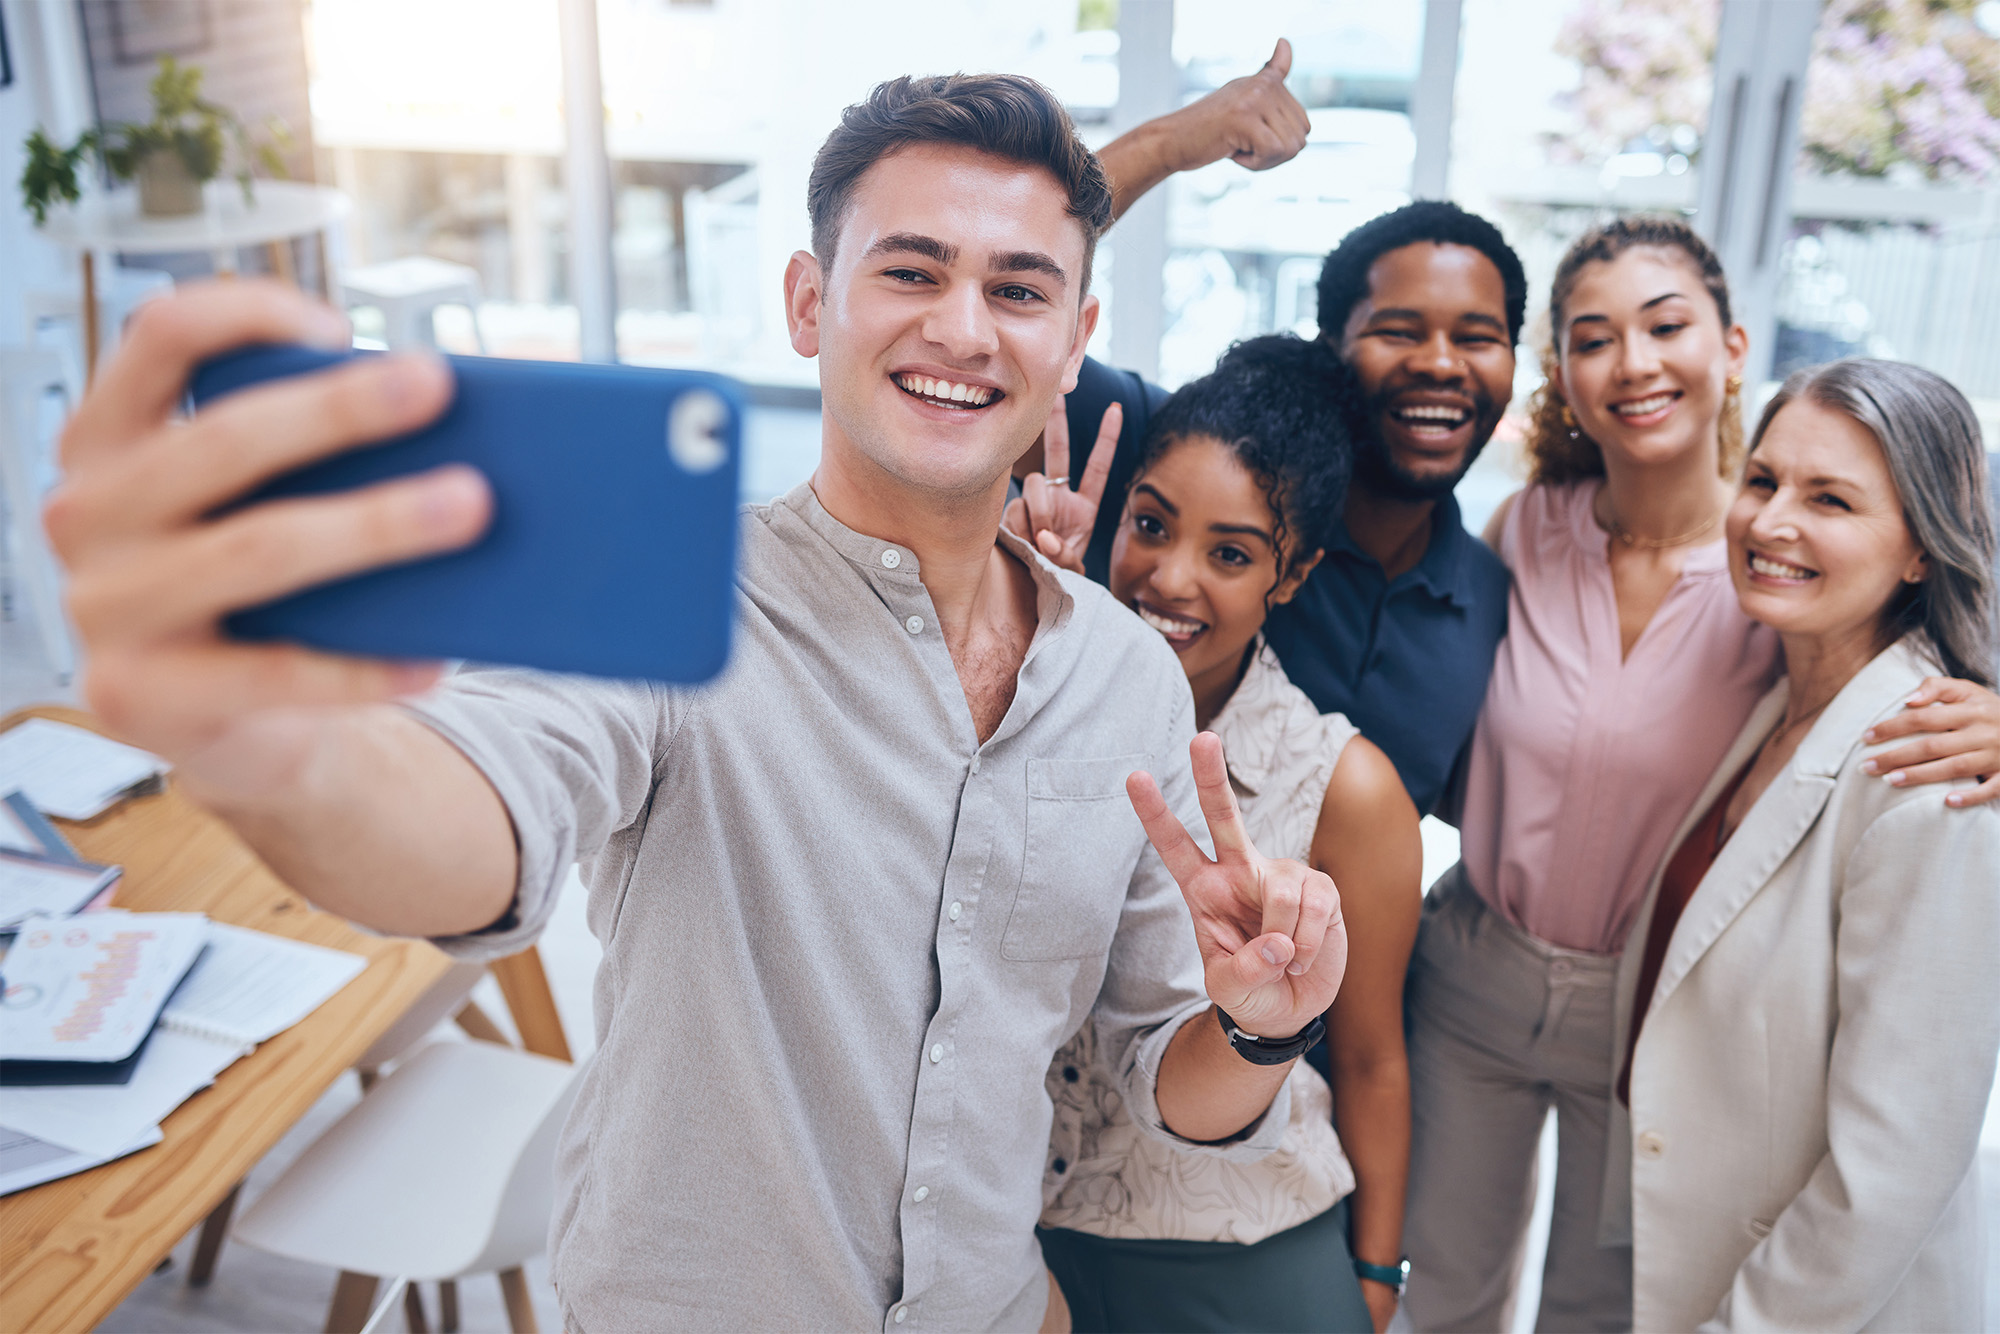 15 Low- and No-cost Employee Benefits to Offer: A group of employees taking a selfie after a meeting. One way to retain top talent is to offer extra benefits.